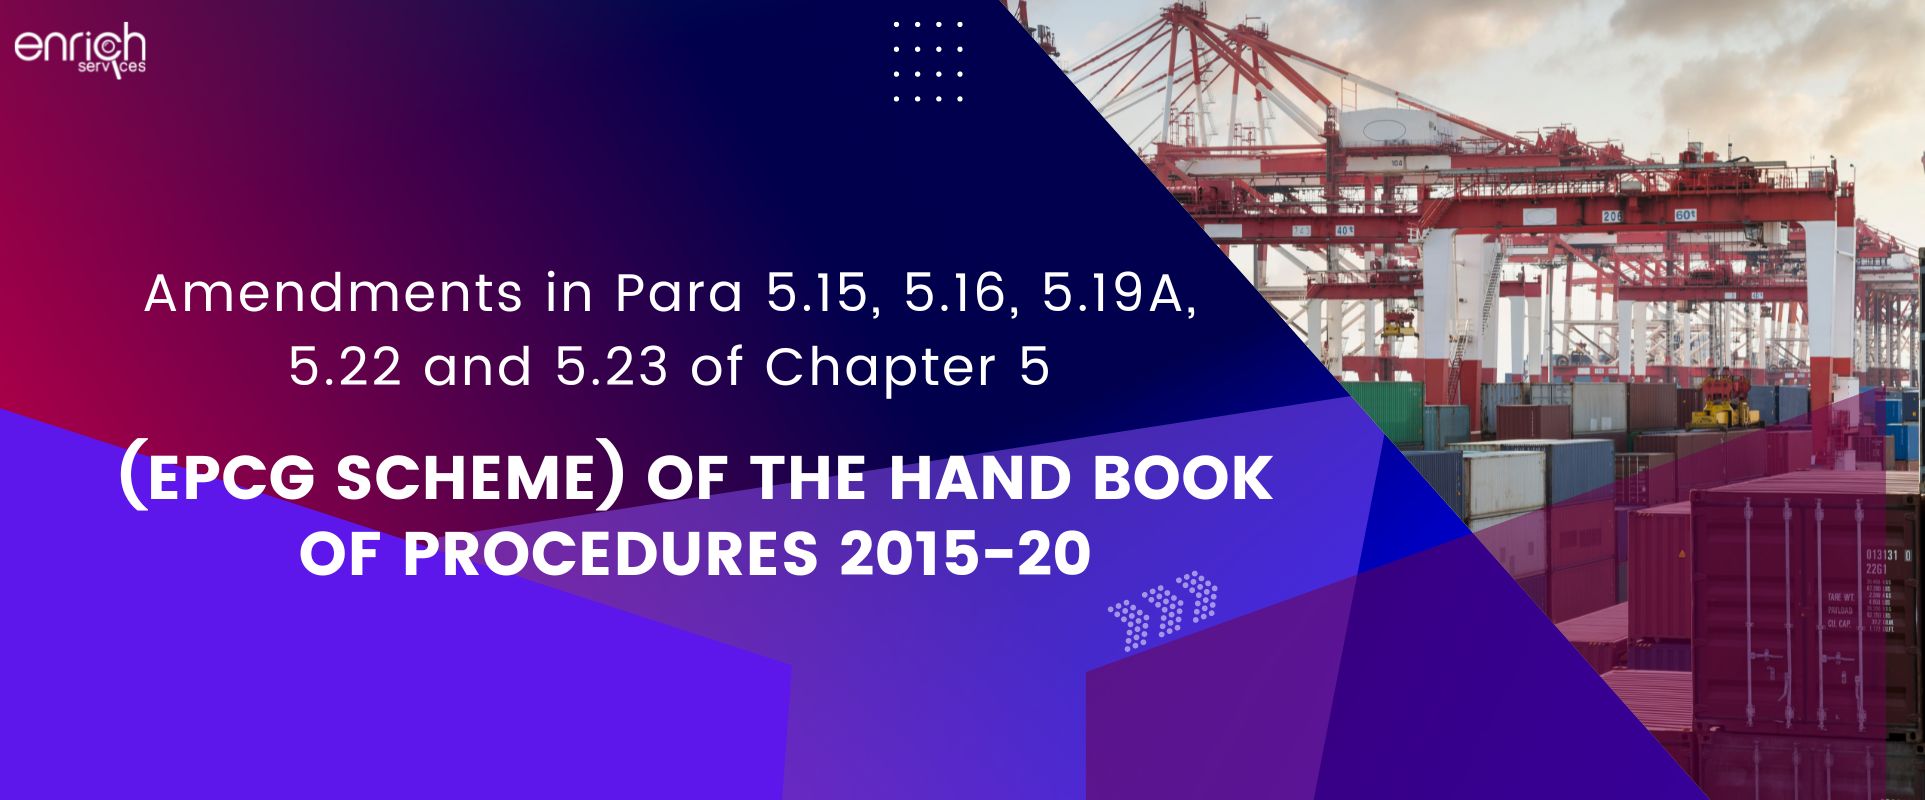 Amendments in Para 5.15, 5.16, 5.19A, 5.22 and 5.23 of Chapter 5 (EPCG Scheme) of the Hand Book of Procedures 2015-20